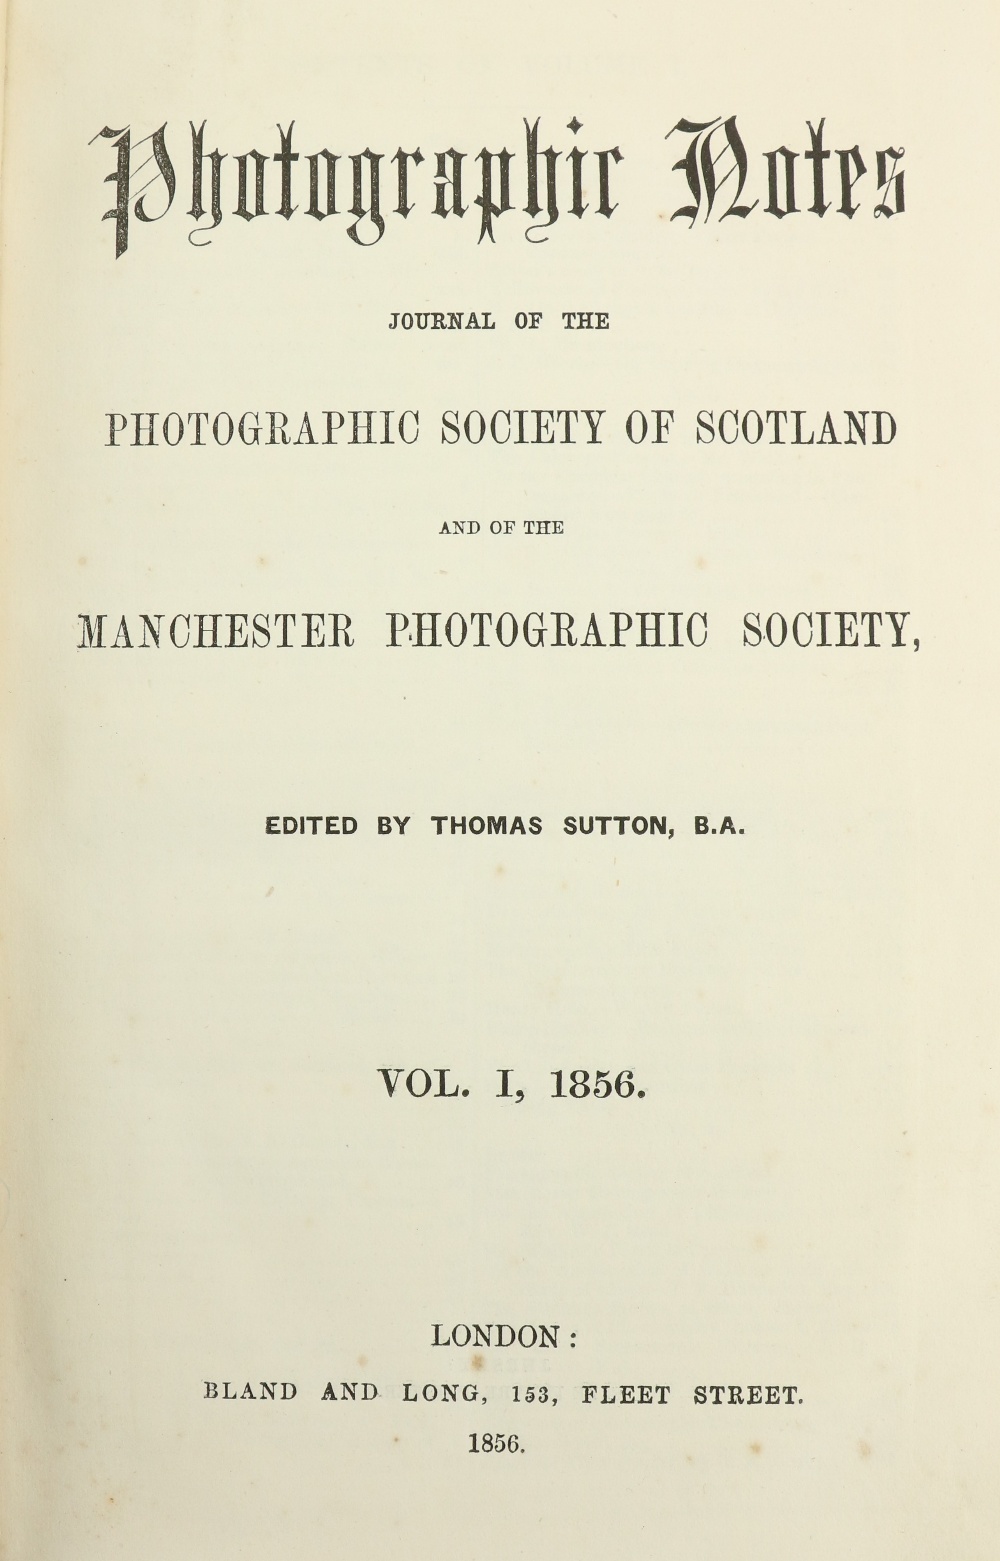 Early Periodical Journal on Photography Sutton (Thomas)editor. Photographic Journal, Journal of